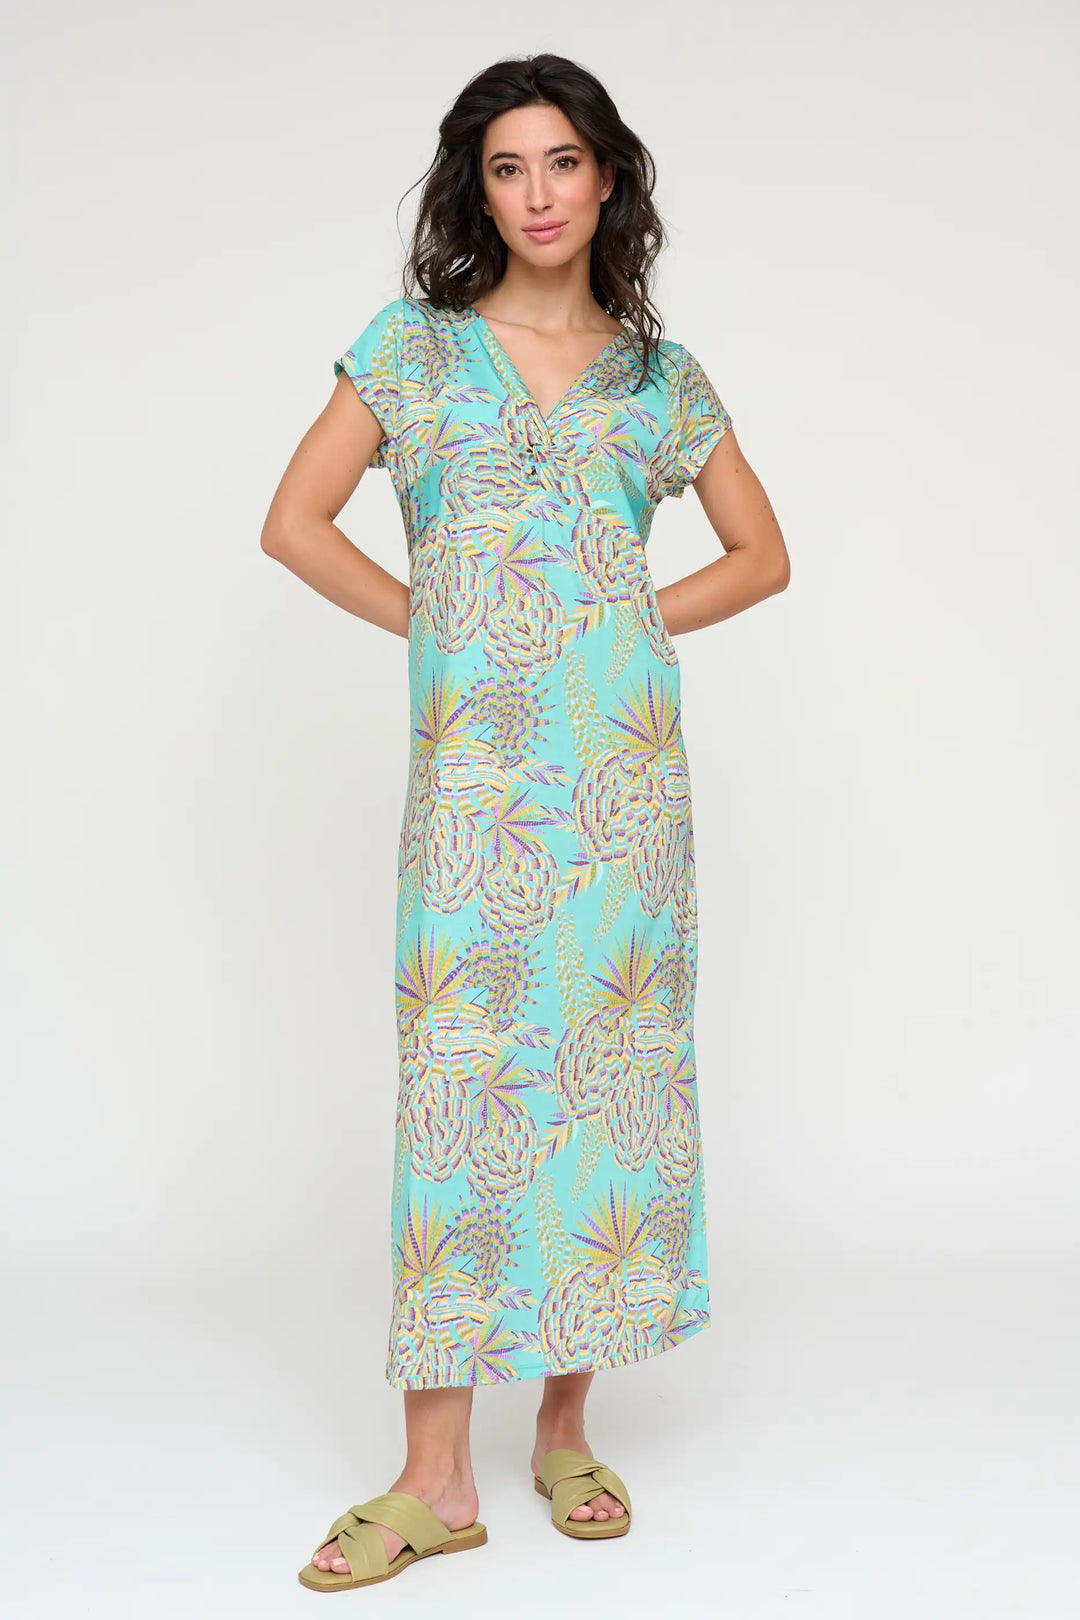 Confident model wearing the 'Amelina' style maxi dress with a tropical palm print in aqua, lavender, and gold, featuring a V-neckline and cap sleeves, paired with olive green slide sandals.